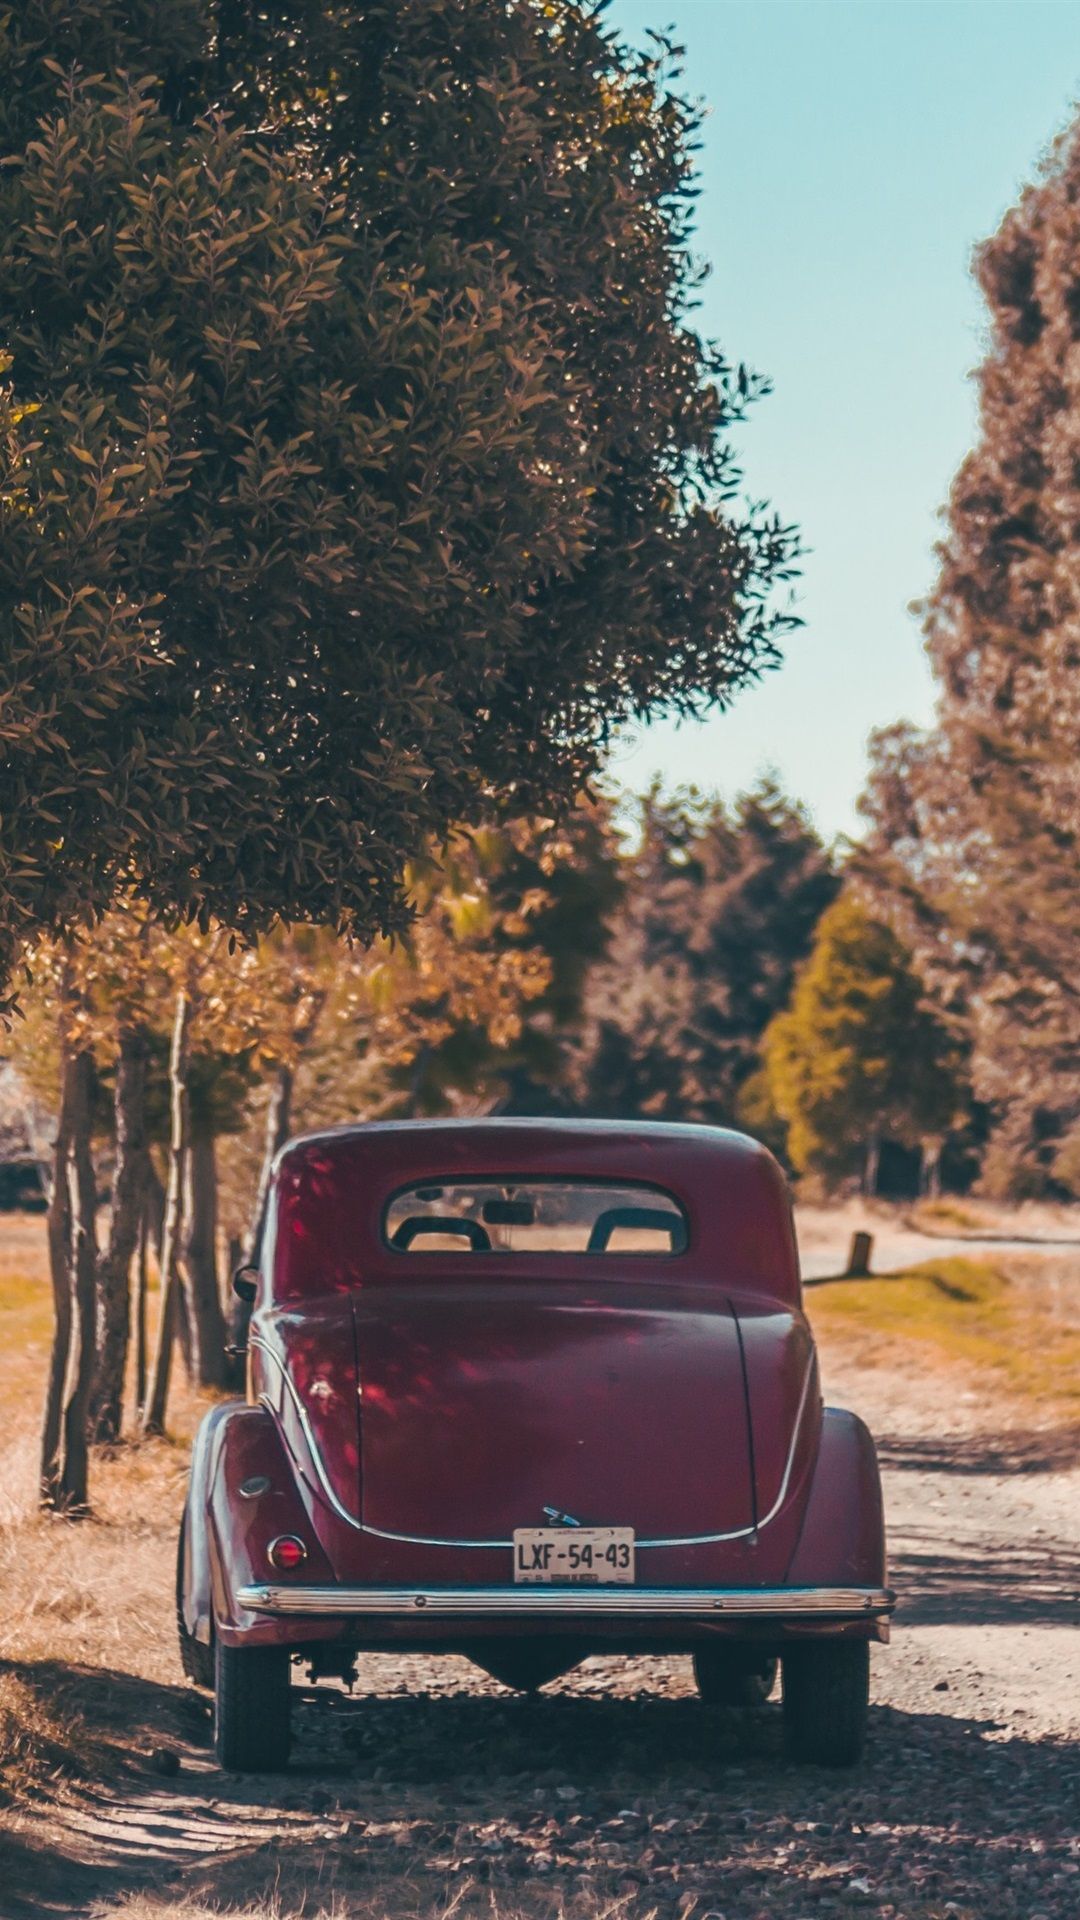 Red Retro Car Rear View, Man, Trees, Autumn 1080x1920 IPhone 8 7 6 6S Plus Wallpaper, Background, Picture, Image